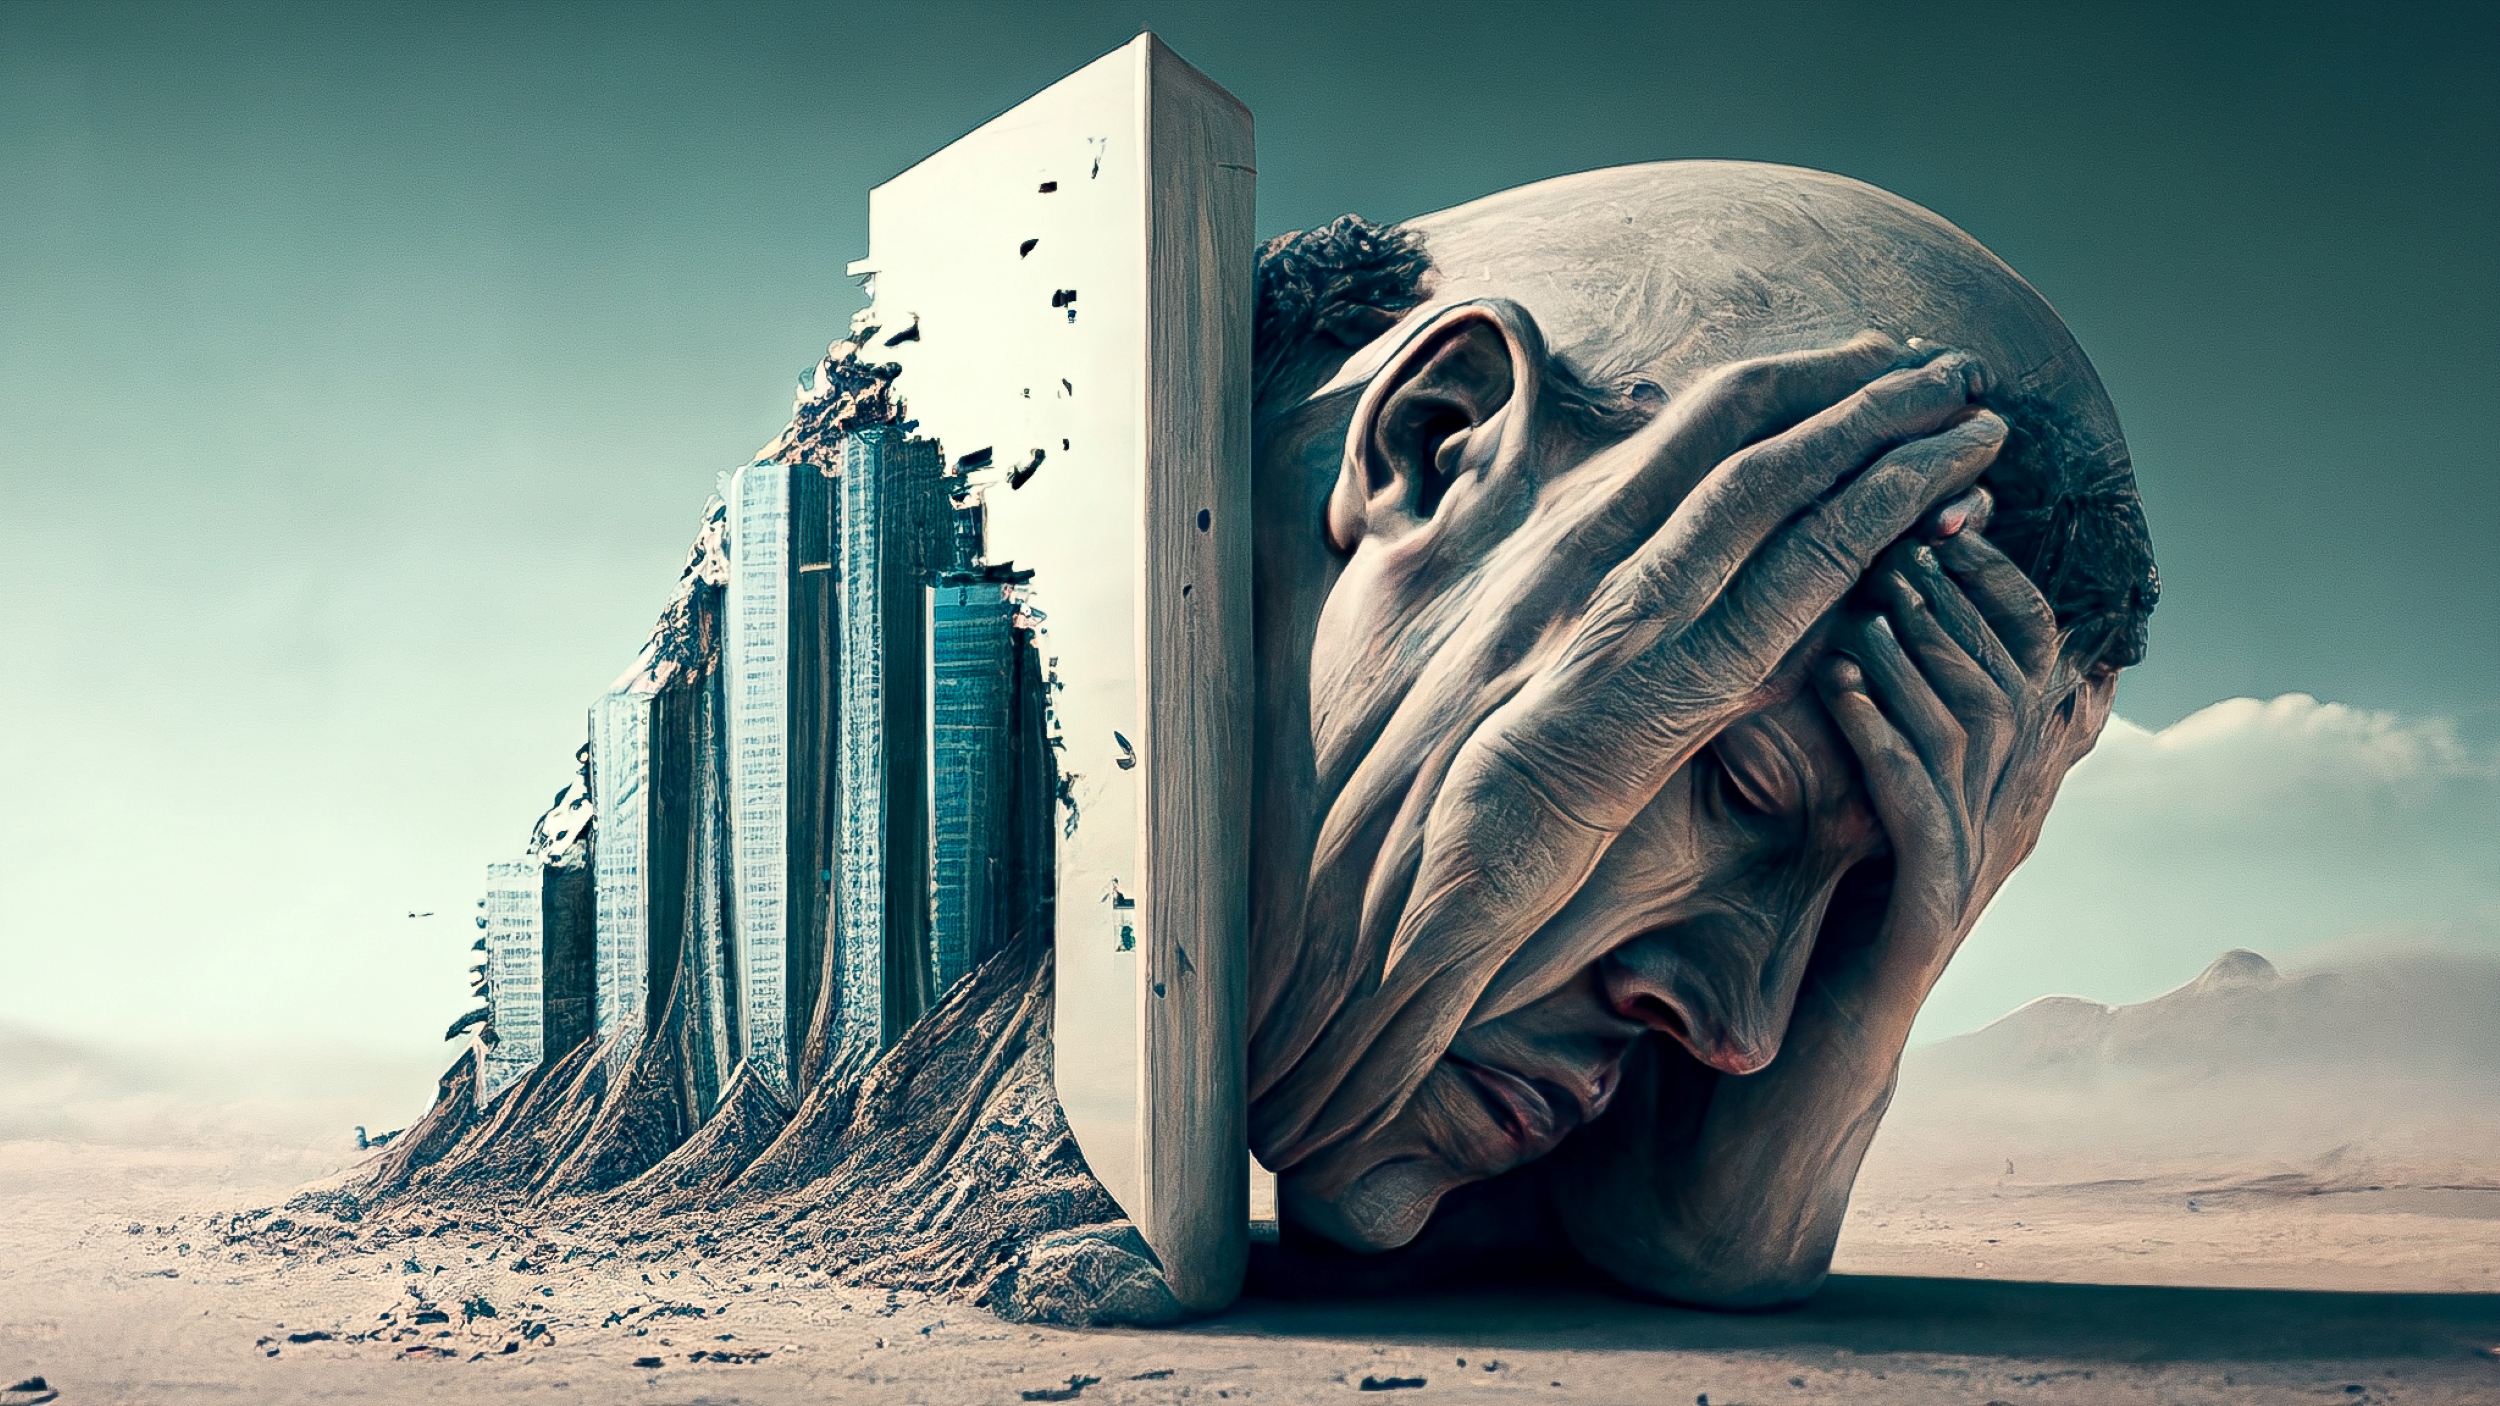 Artificial Intelligence digital artwork by Julian Giacomelli depicting an economic crisis in a surrealist style.